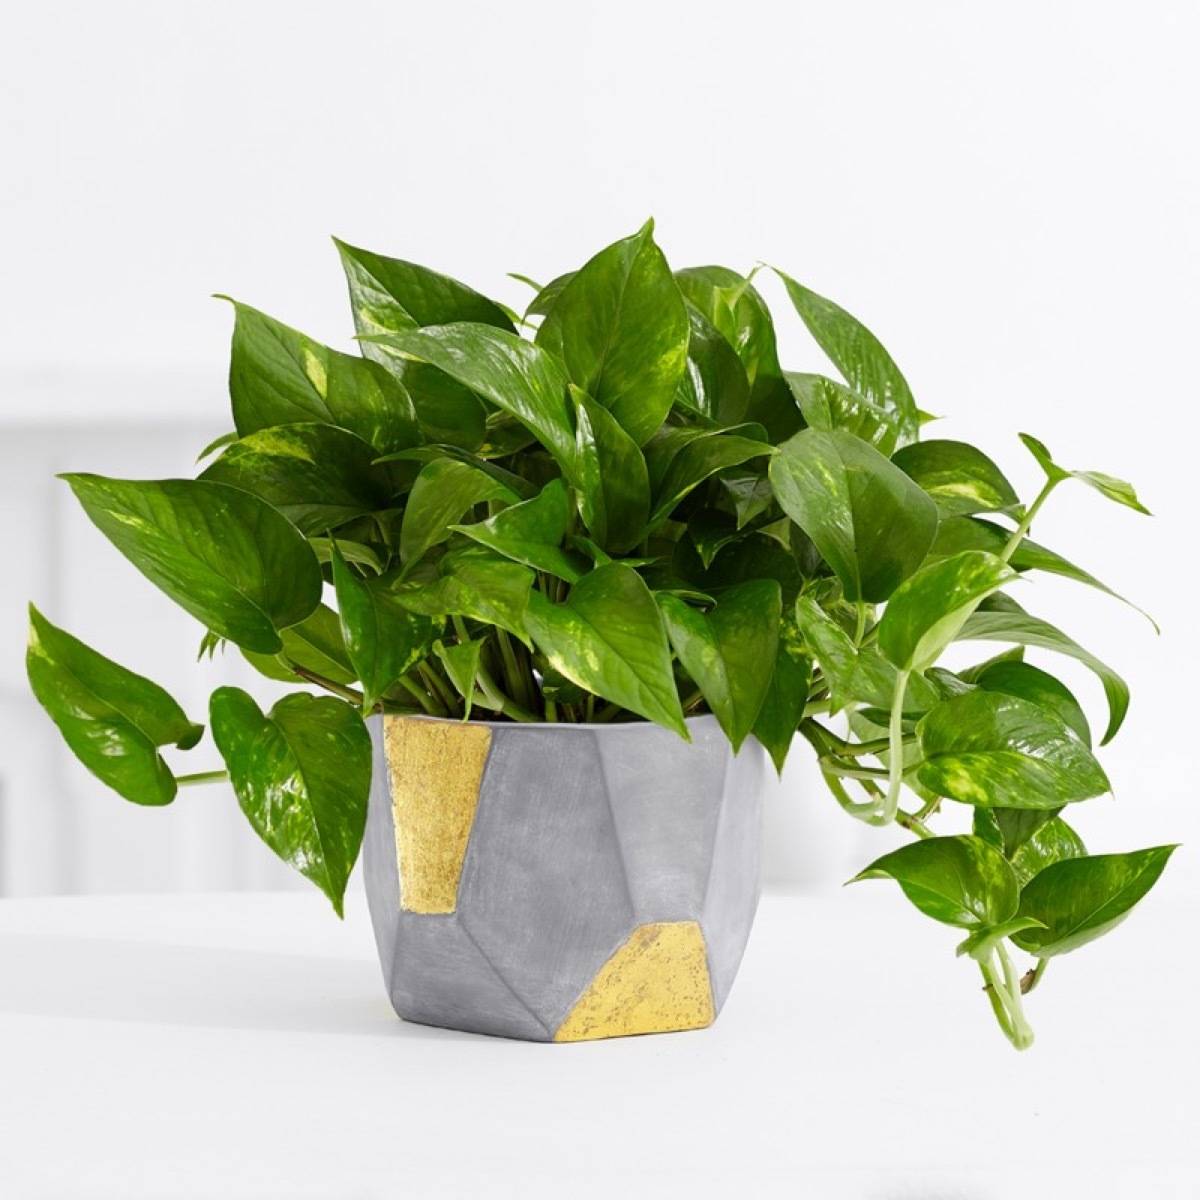 Do your houseplant shopping online: ProFlowers